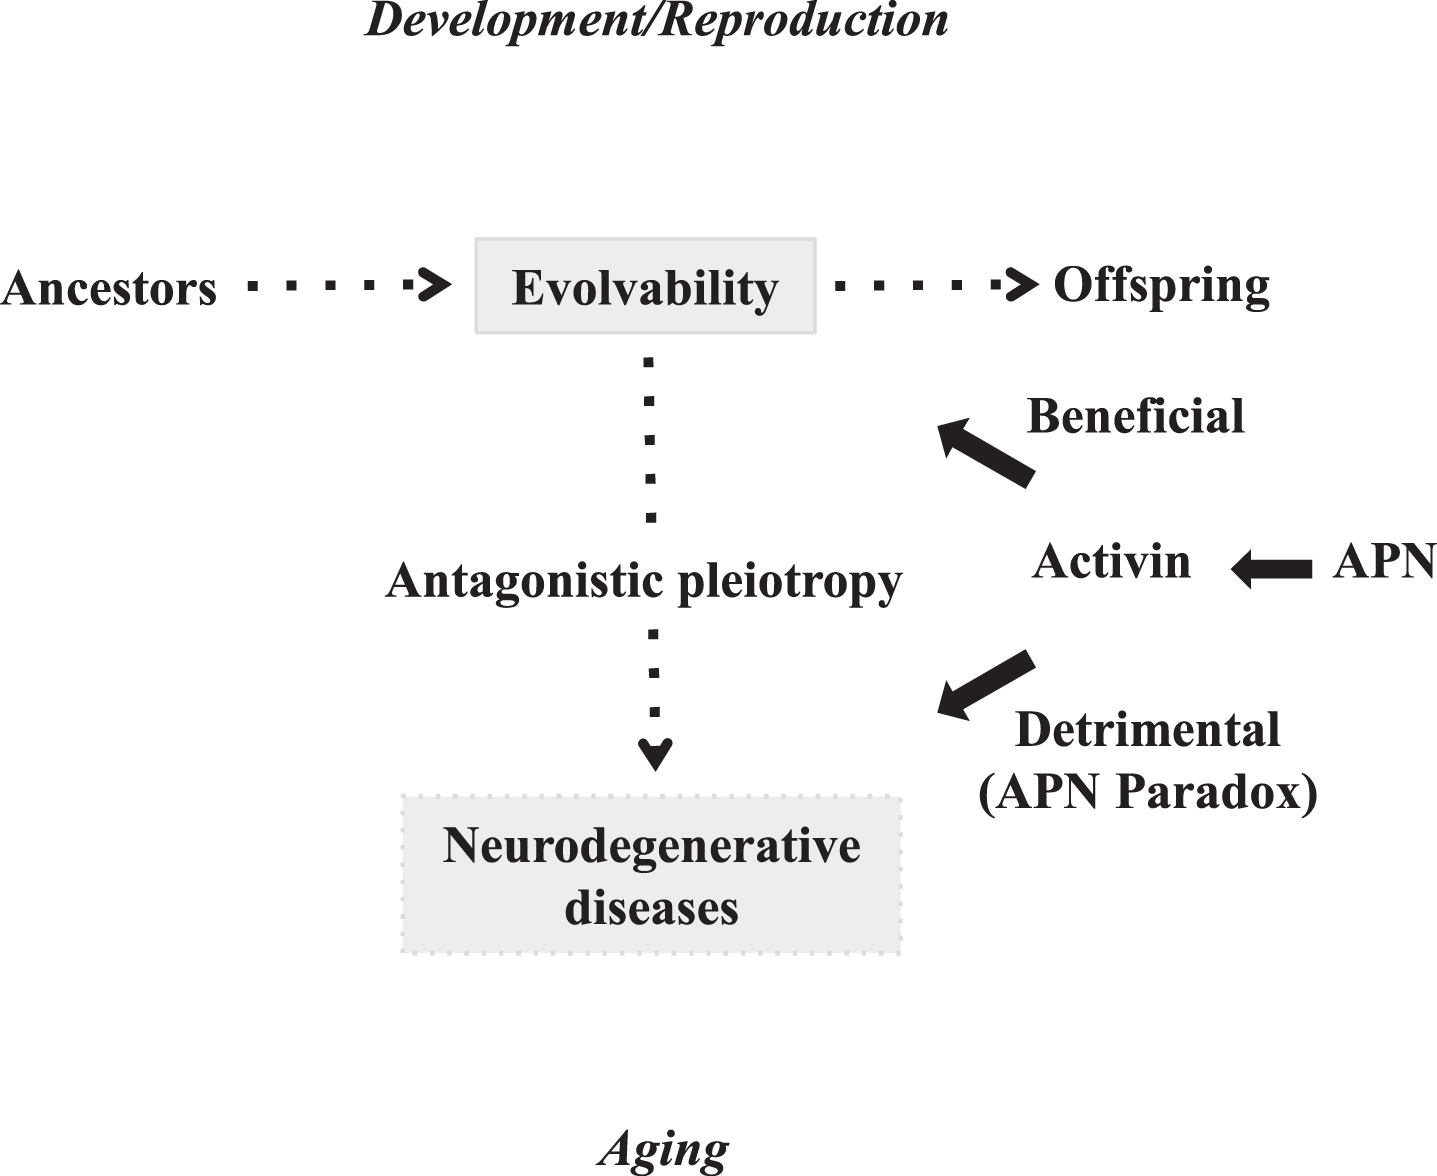 Diagram showing that APN might stimulate both amyloidogenic evolvability and neurodegenerative disorders. Evolvability during developmental/reproductive stages and neurodegenerative diseases such as AD in post-reproductive senescence are driven by aggregated APs, and might exist in an antagonistic pleiotropy relationship. APN might be beneficial for amyloidogenic evolvability, while paradoxically detrimental (namely the APN paradox) in the form of neurodegenerative diseases through the antagonistic pleiotropy.